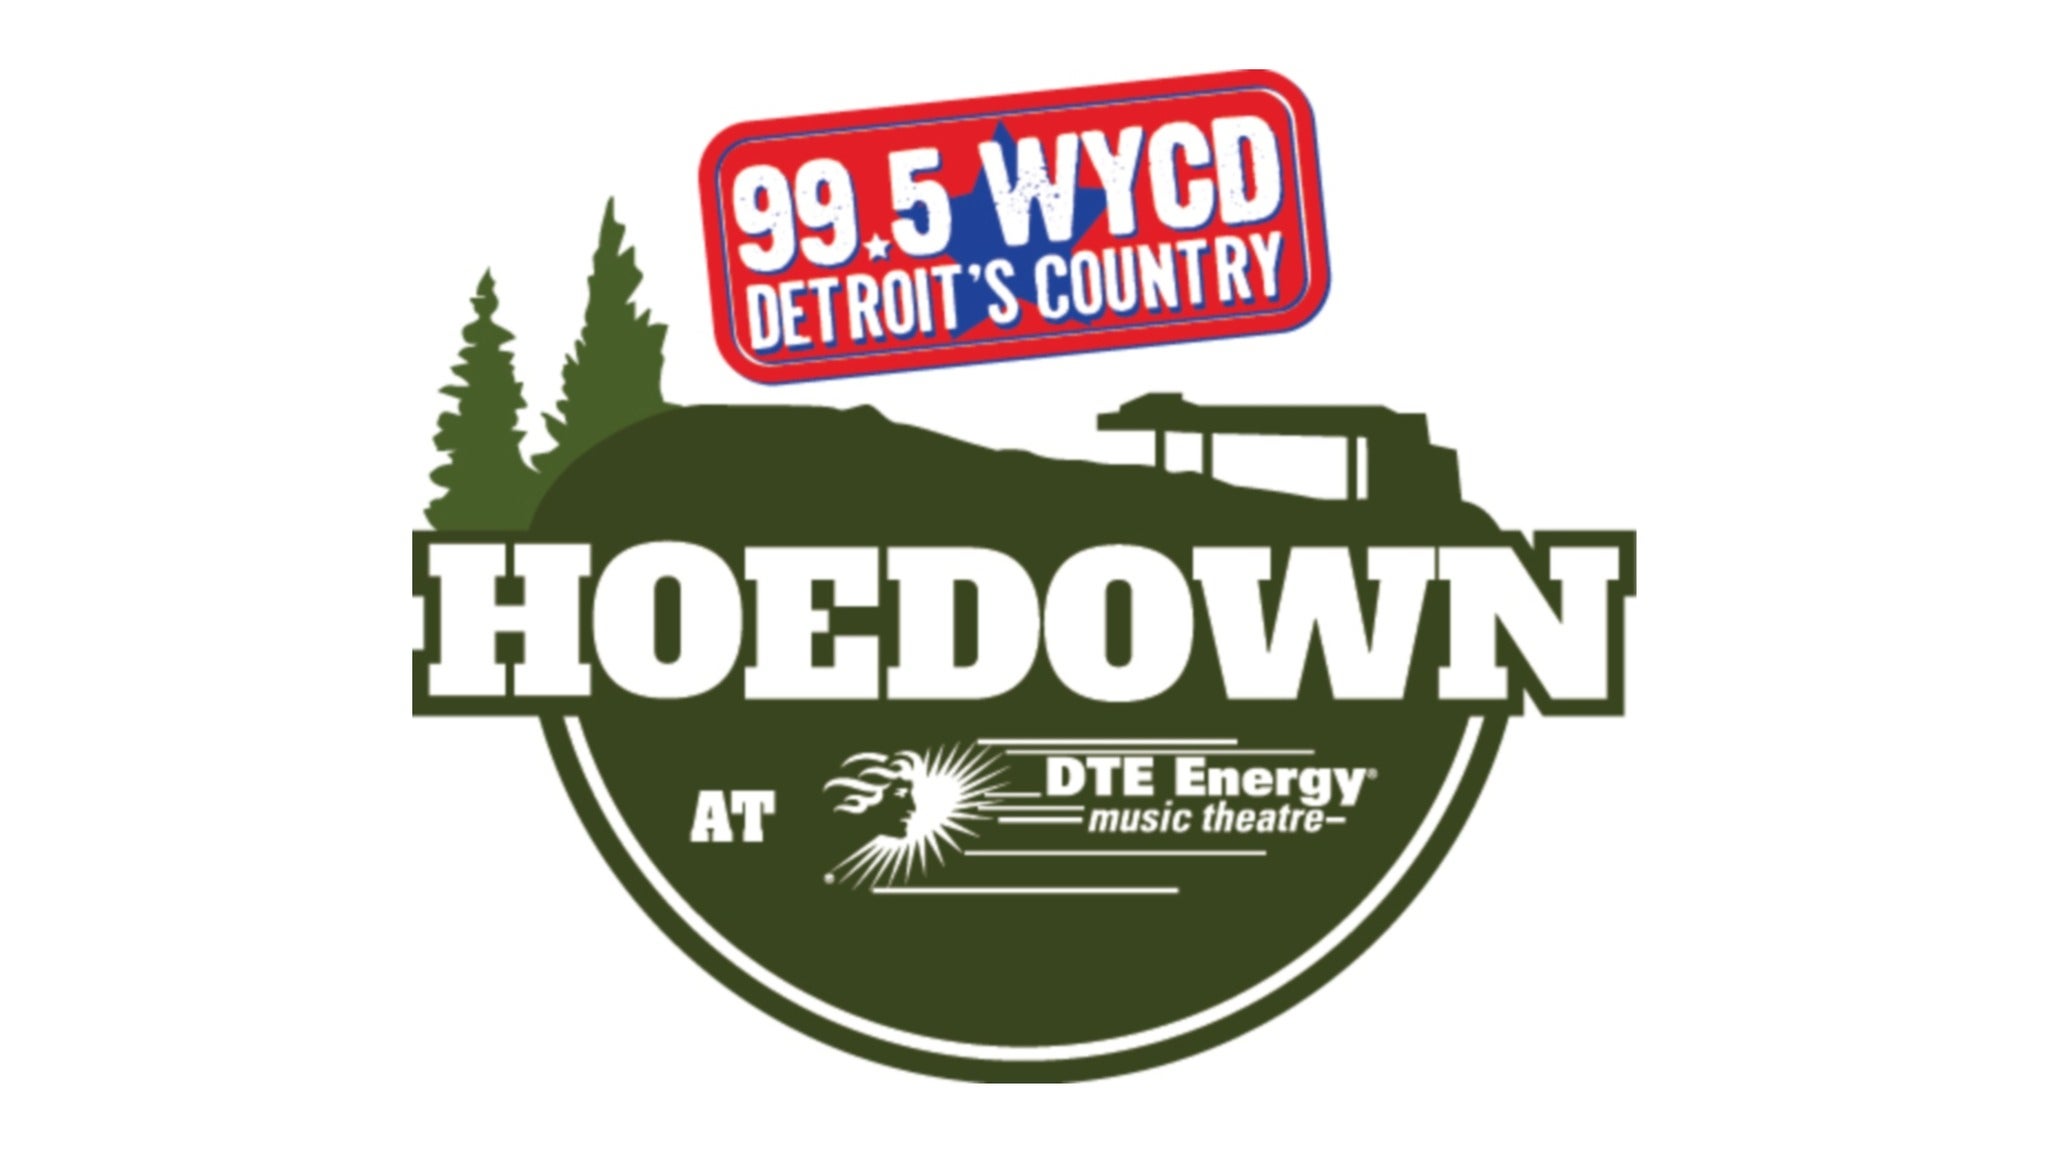 99.5 WYCD Hoedown Featuring Lady A in Clarkston promo photo for Official Platinum presale offer code